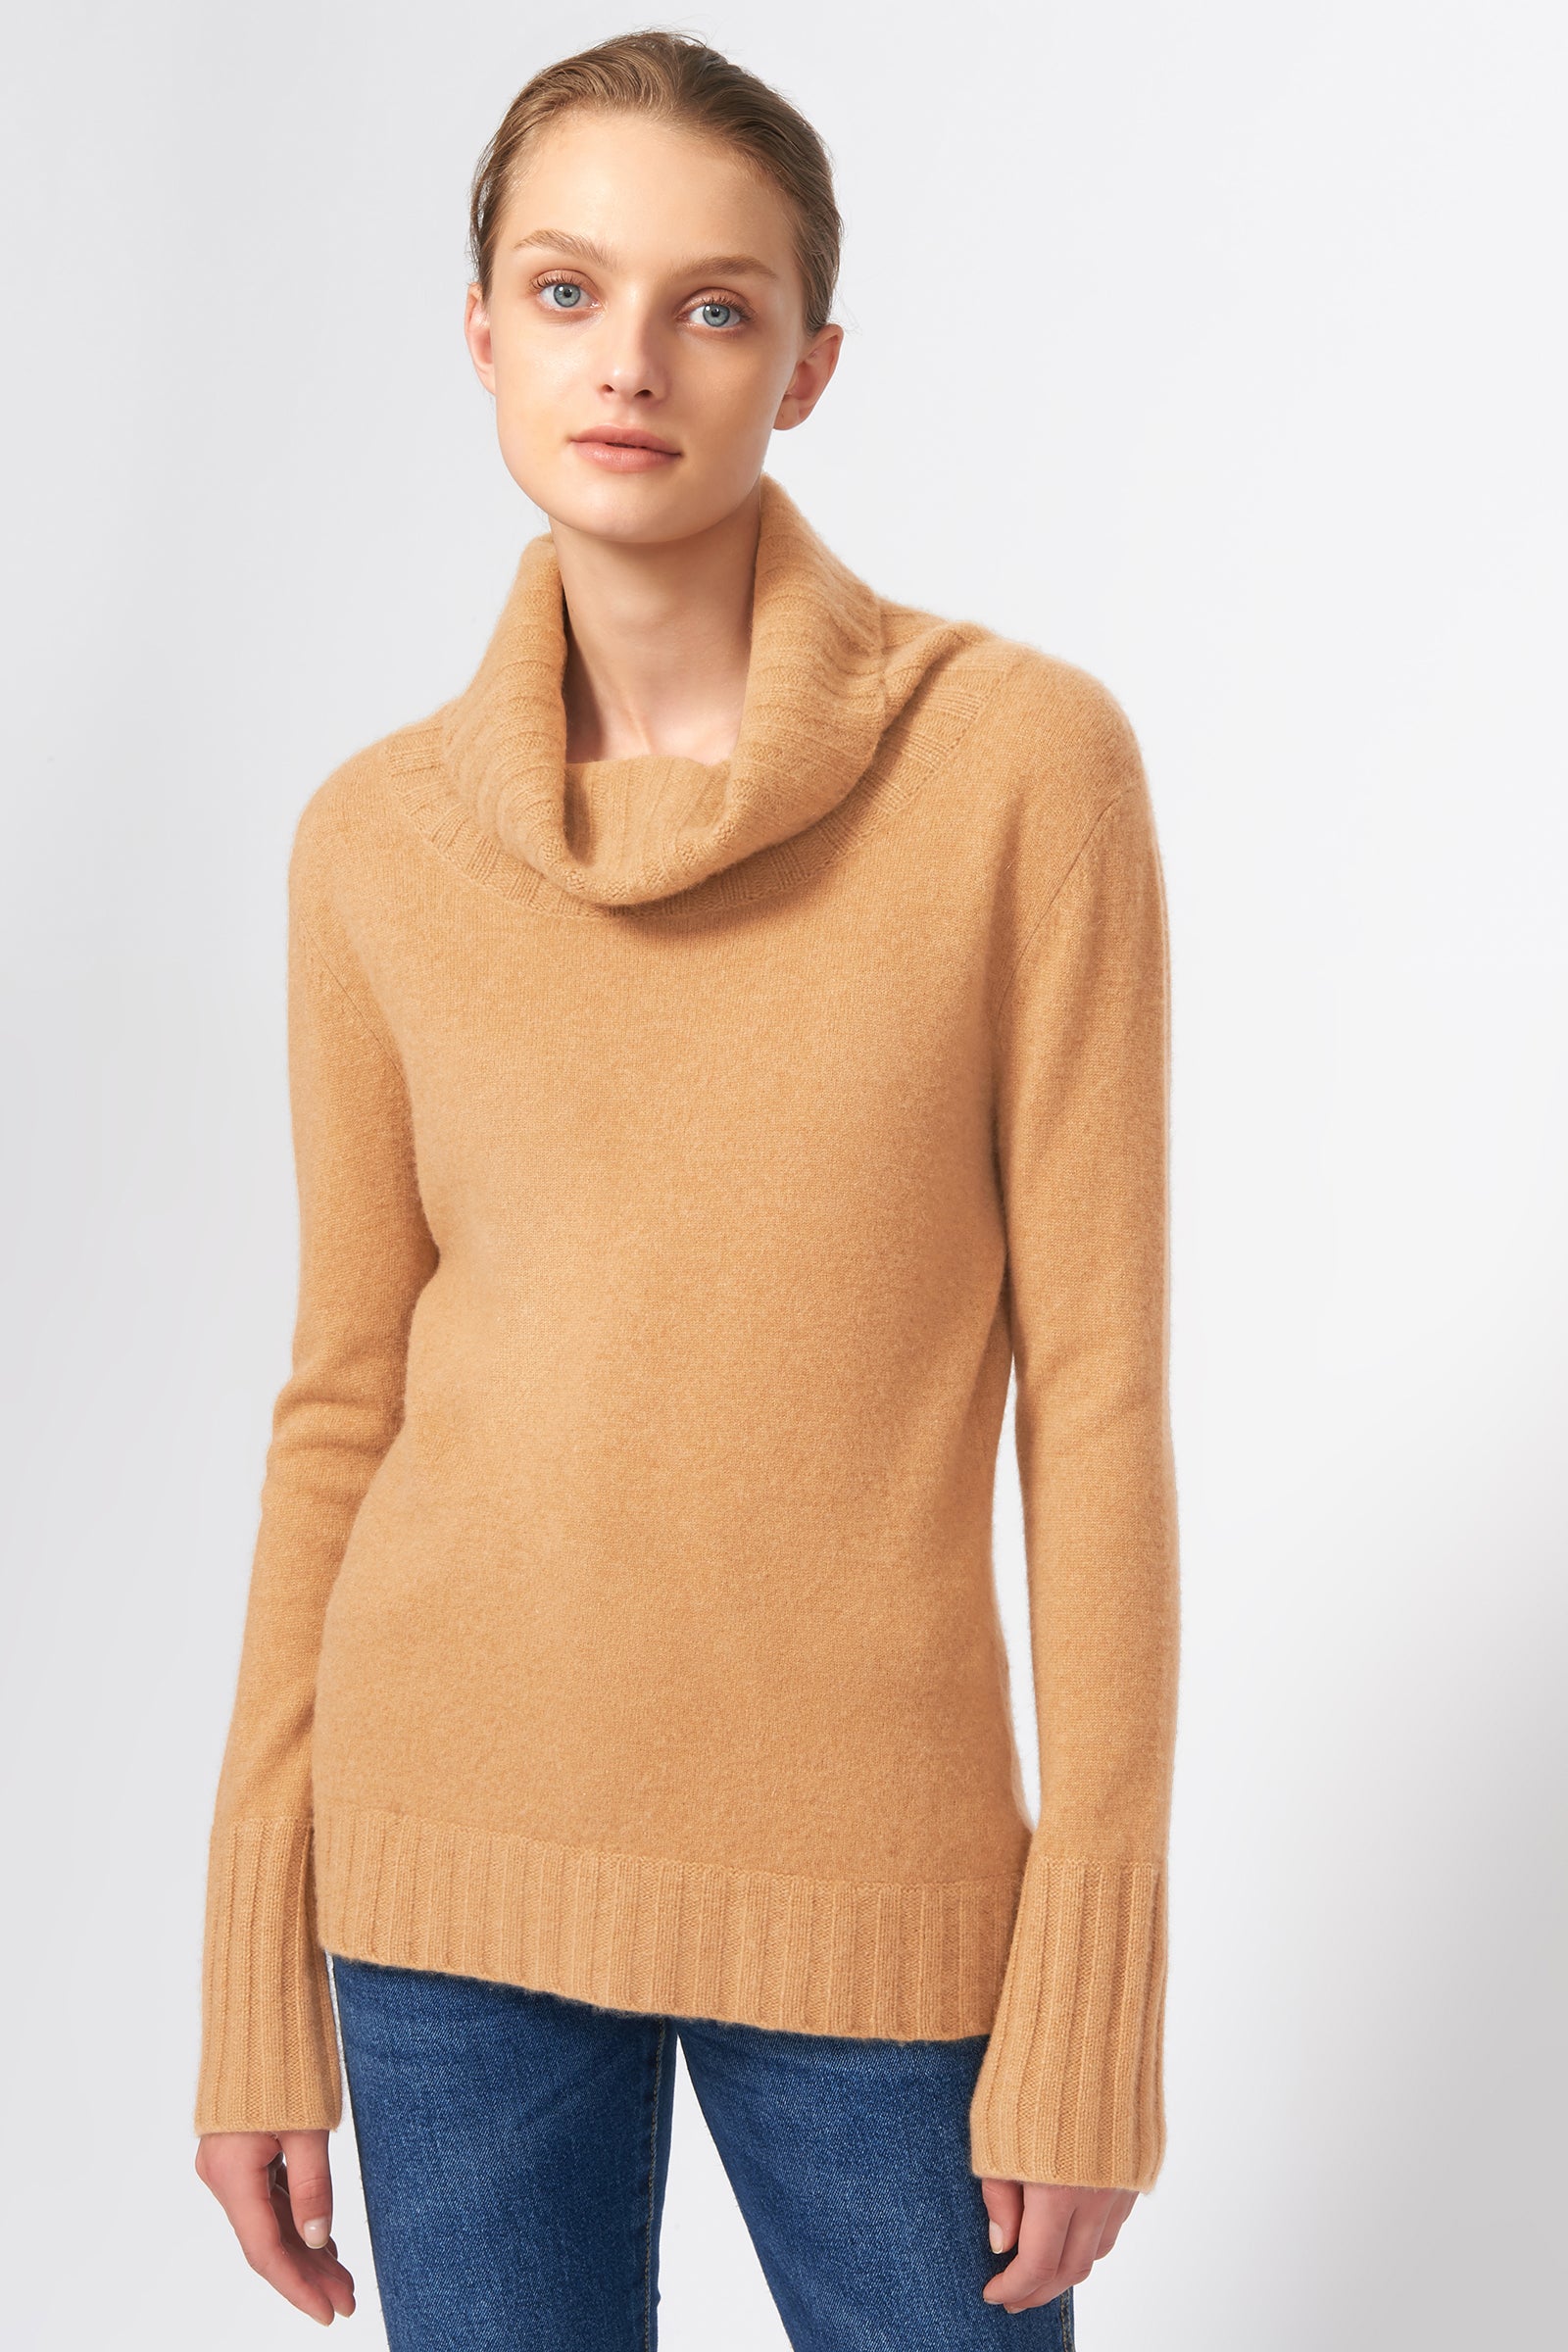 Kal Rieman Cashmere Cowel T-Neck in Camel on Model Front View